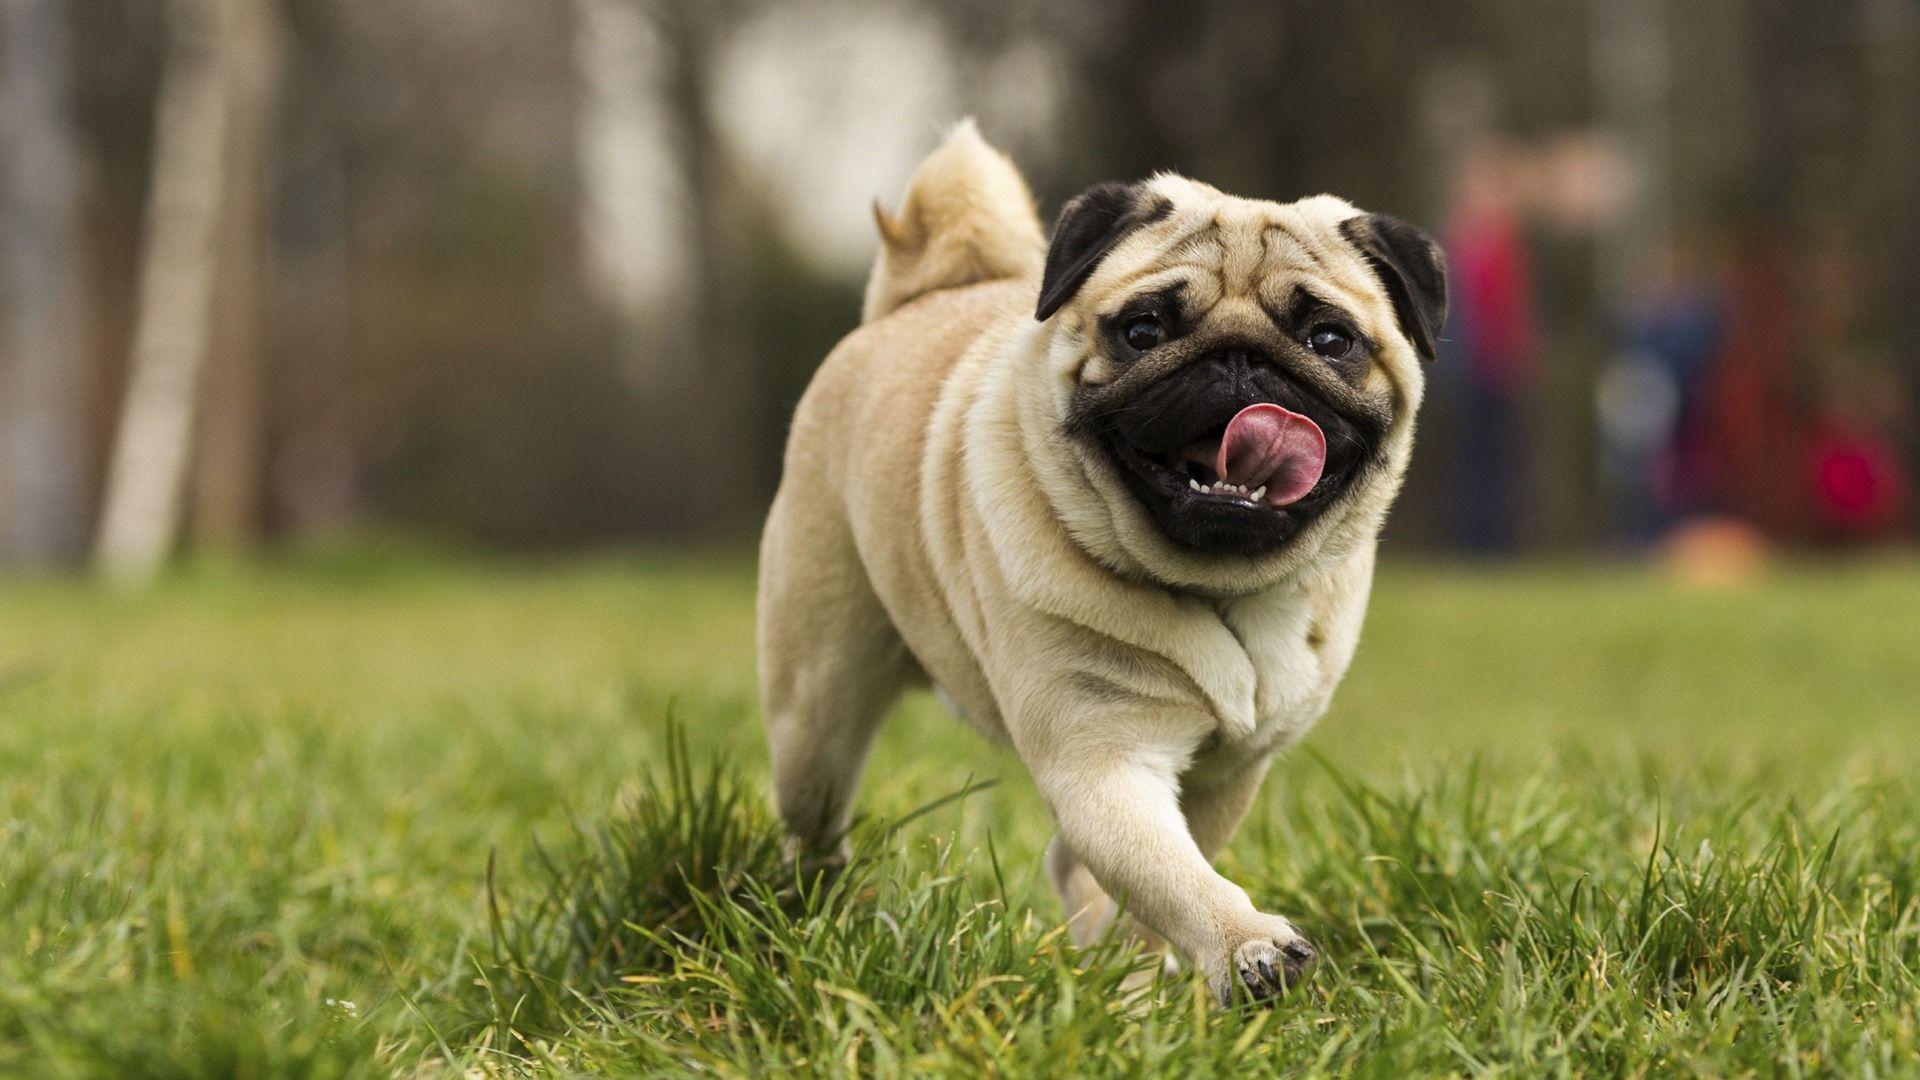 Cute Pug Dog Wallpapers - Top Free Cute Pug Dog Backgrounds